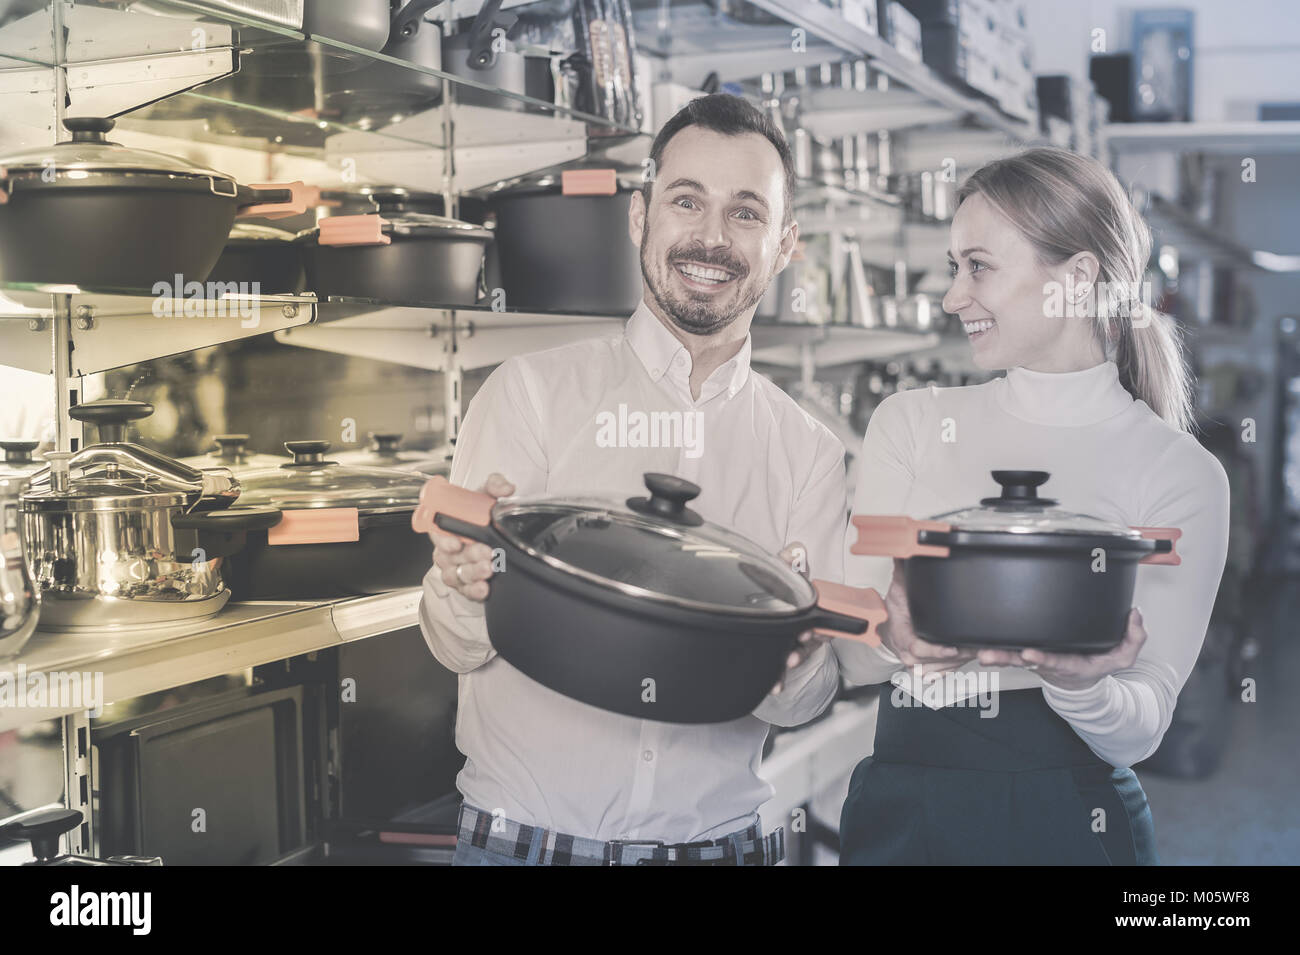 https://c8.alamy.com/comp/M05WF8/smiling-couple-selects-kitchen-utensils-in-the-store-M05WF8.jpg